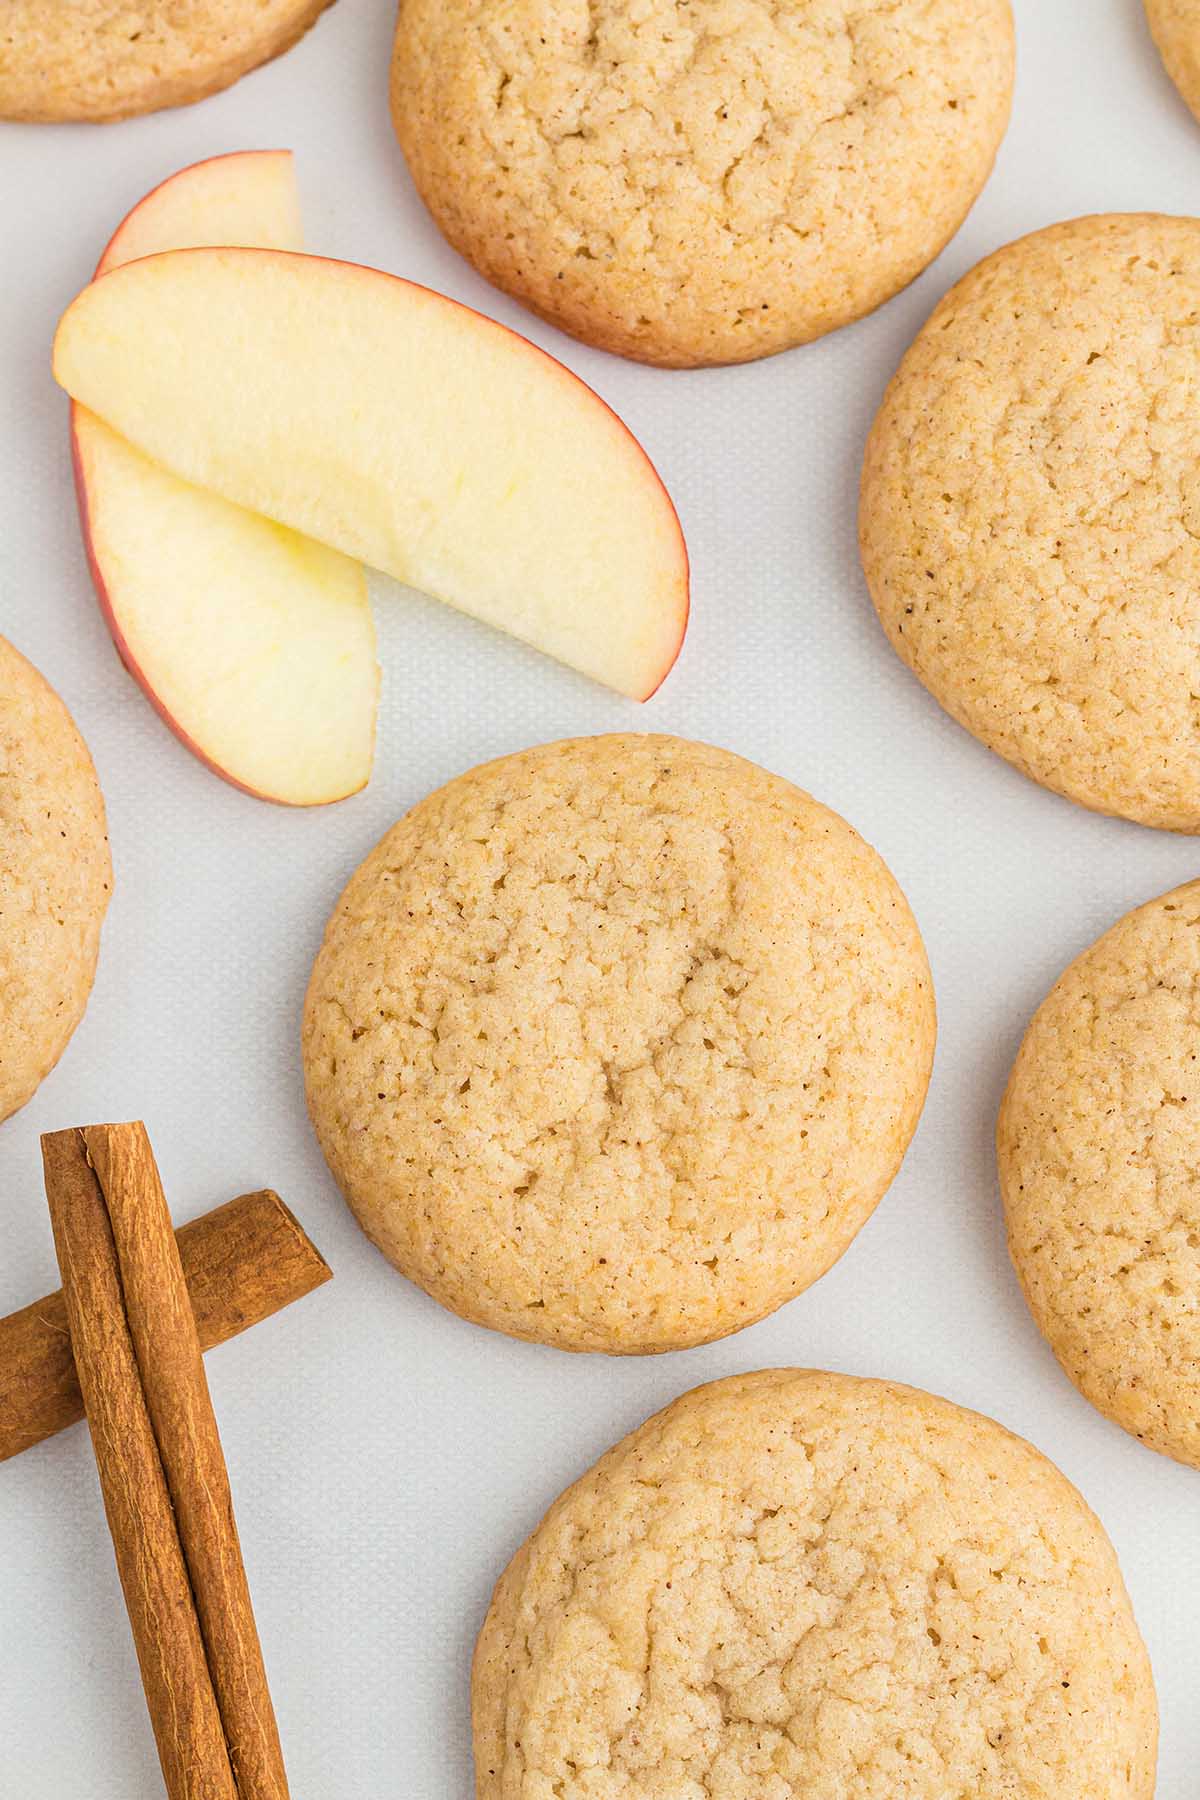 Applesauce Cookies on the table with a couple slices of apple.